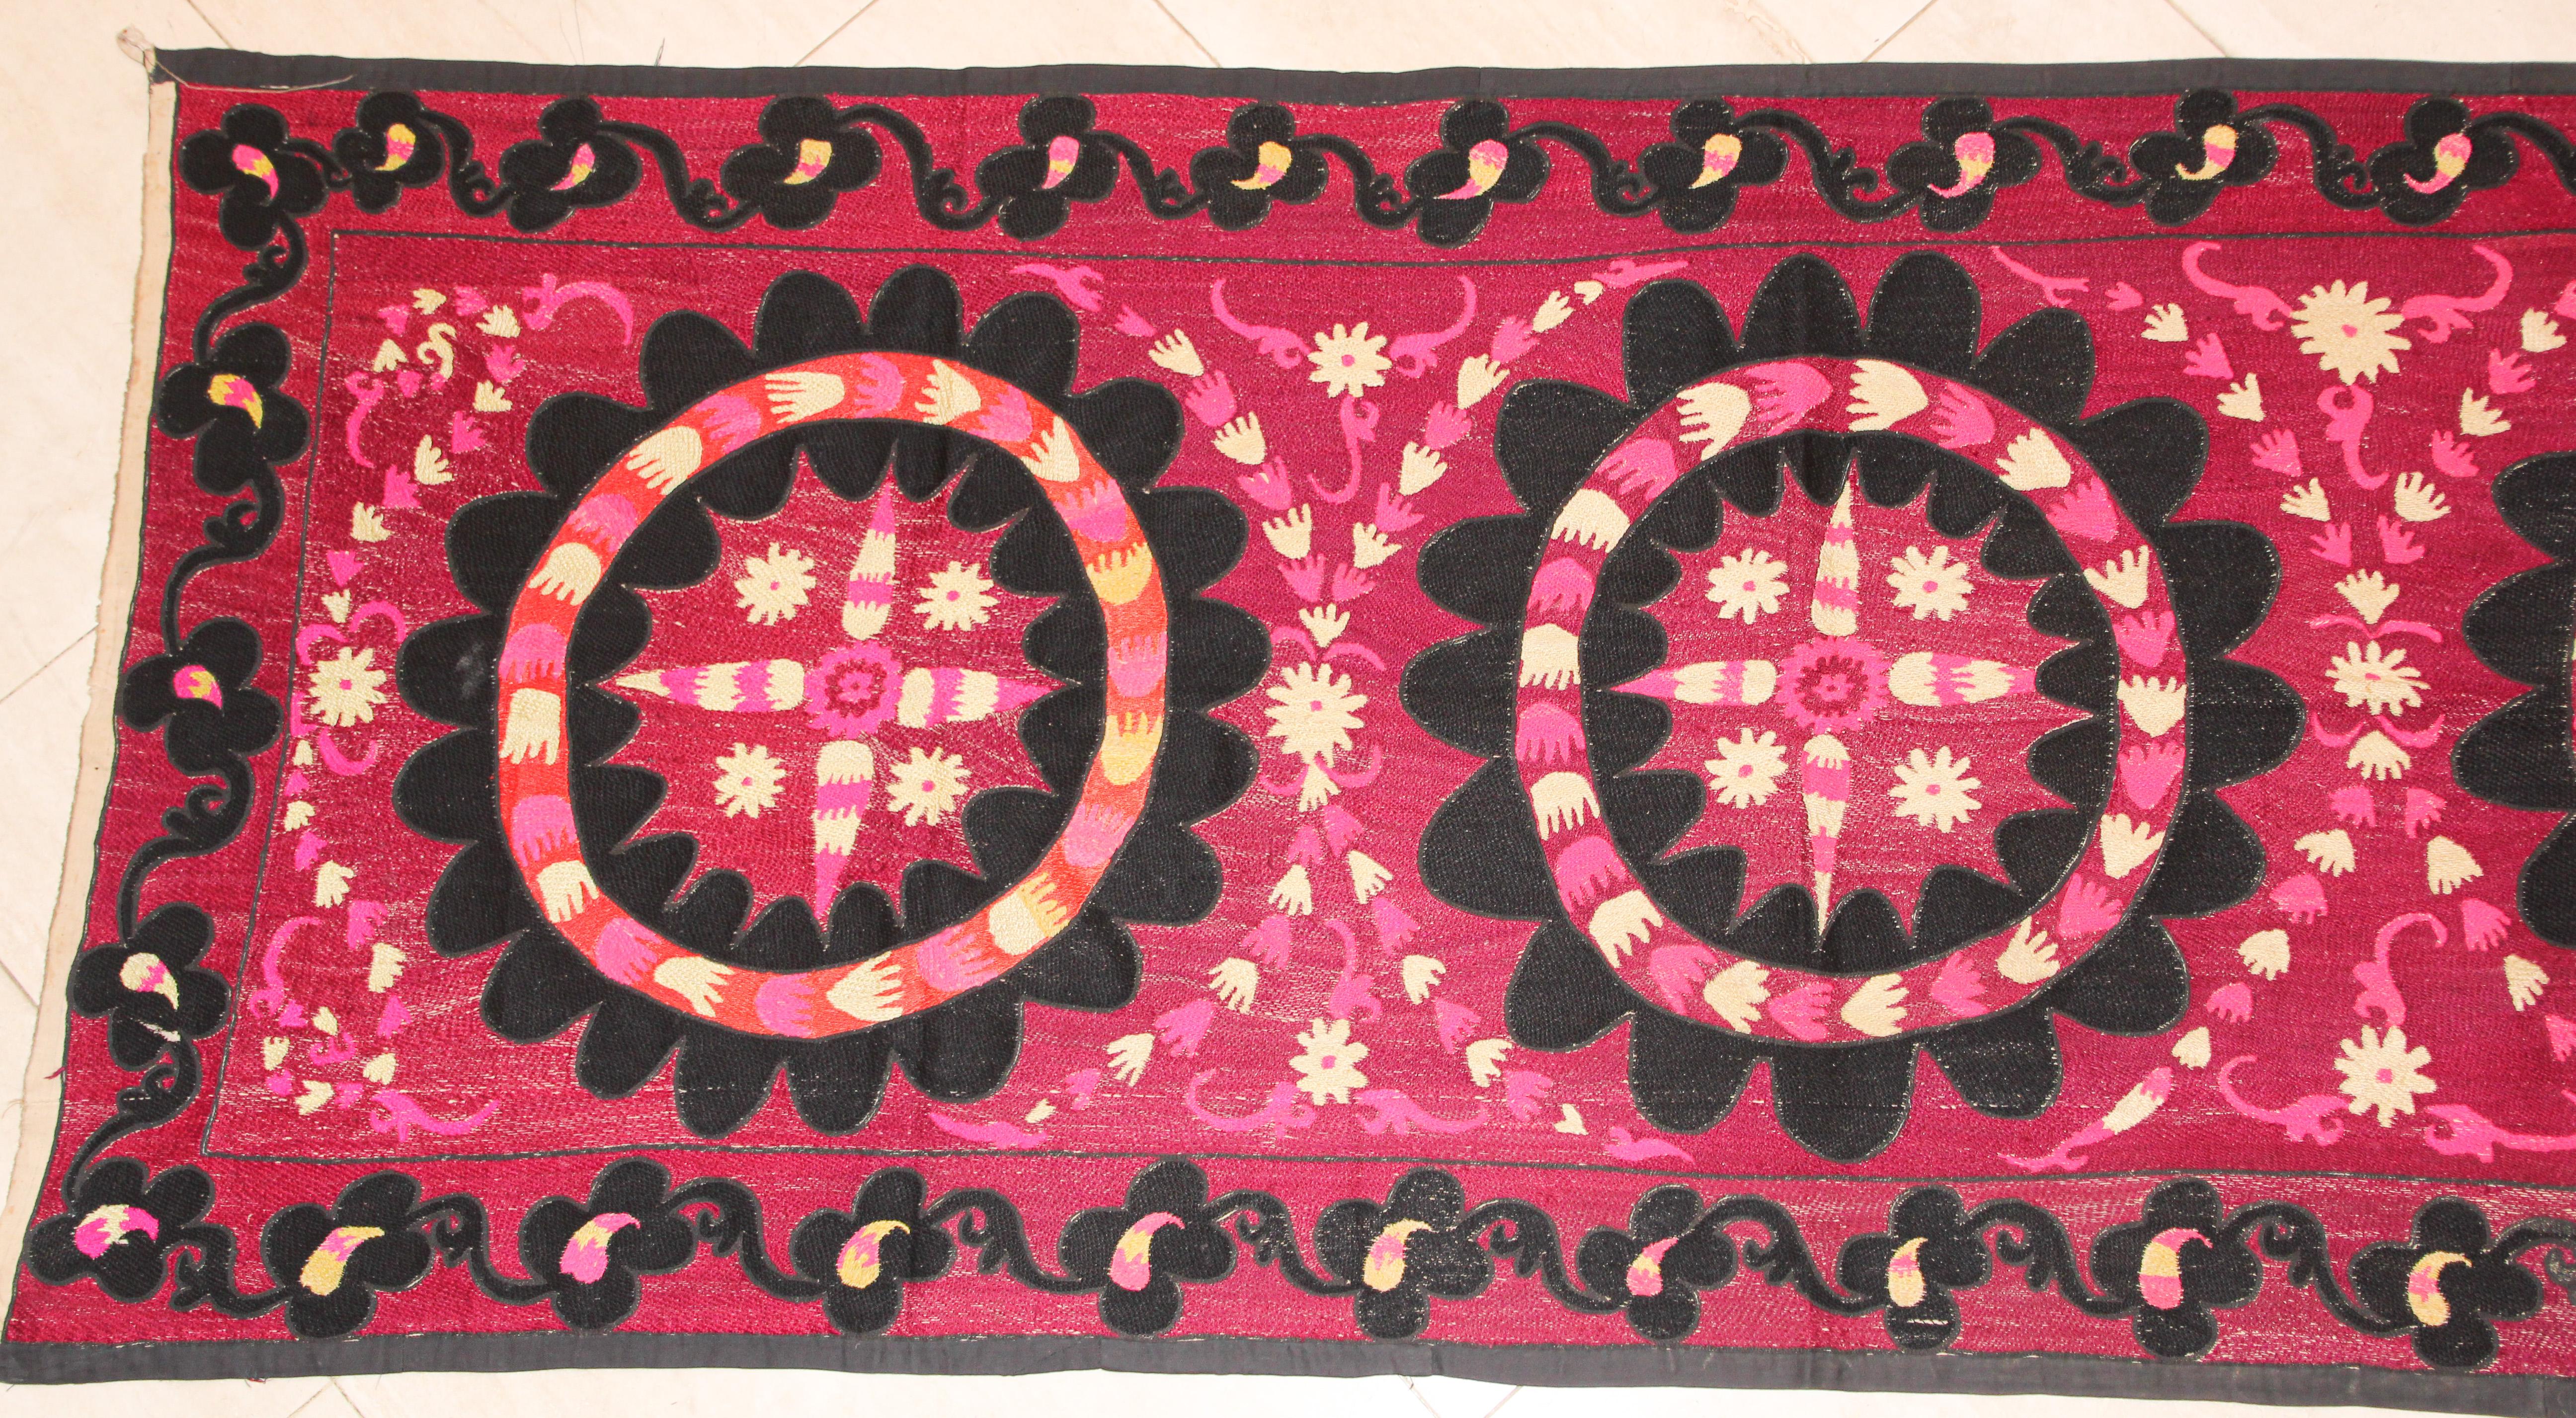 Vintage embroidered Uzbek Suzani.
Beautiful suzani hand-stitched Turkish designs with silk in traditional patterns and vibrant pink, fuschia pink, purple black colors and off white beige.
The suzani features a row of three medallions flowers within